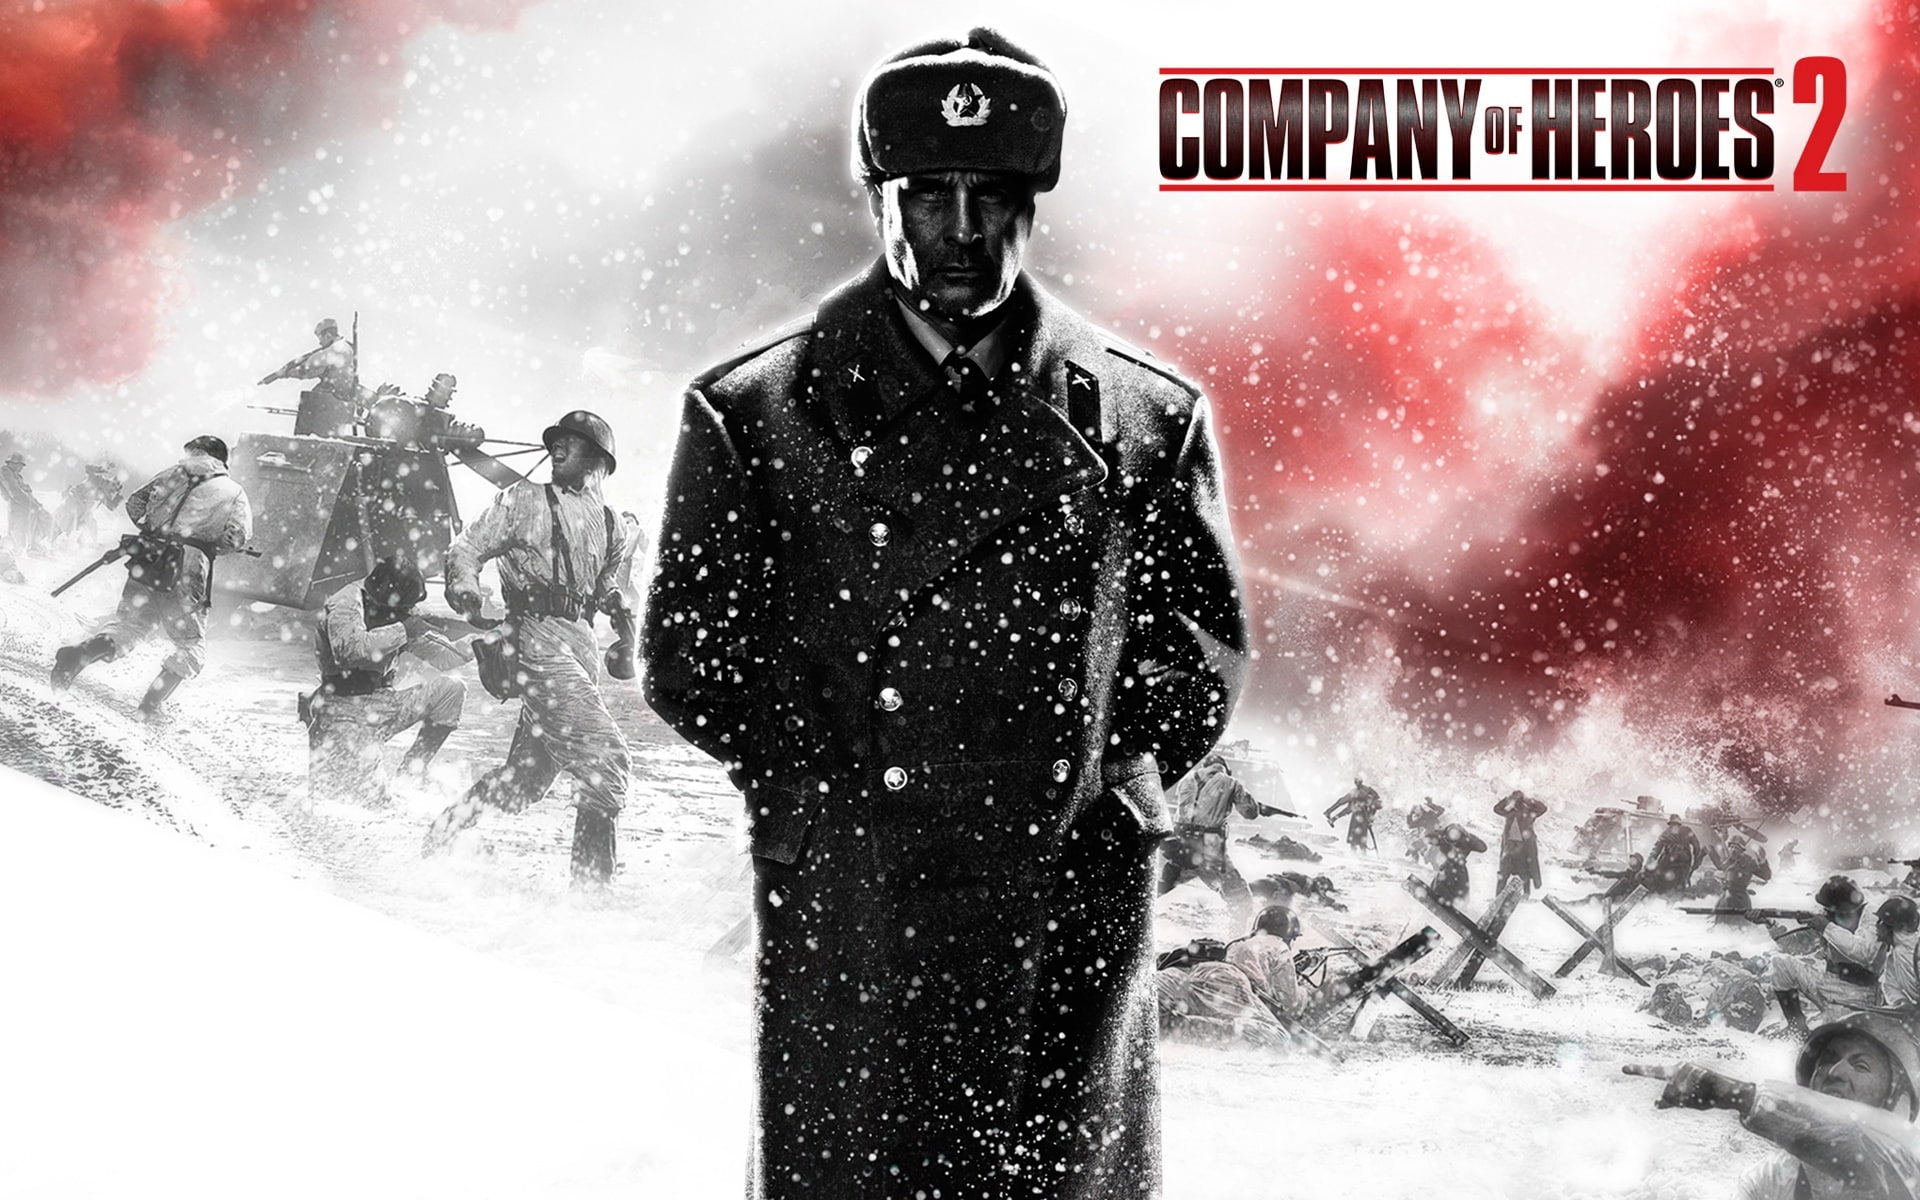 soldiers, The Second World War, Company of Heroes 2, overcoat